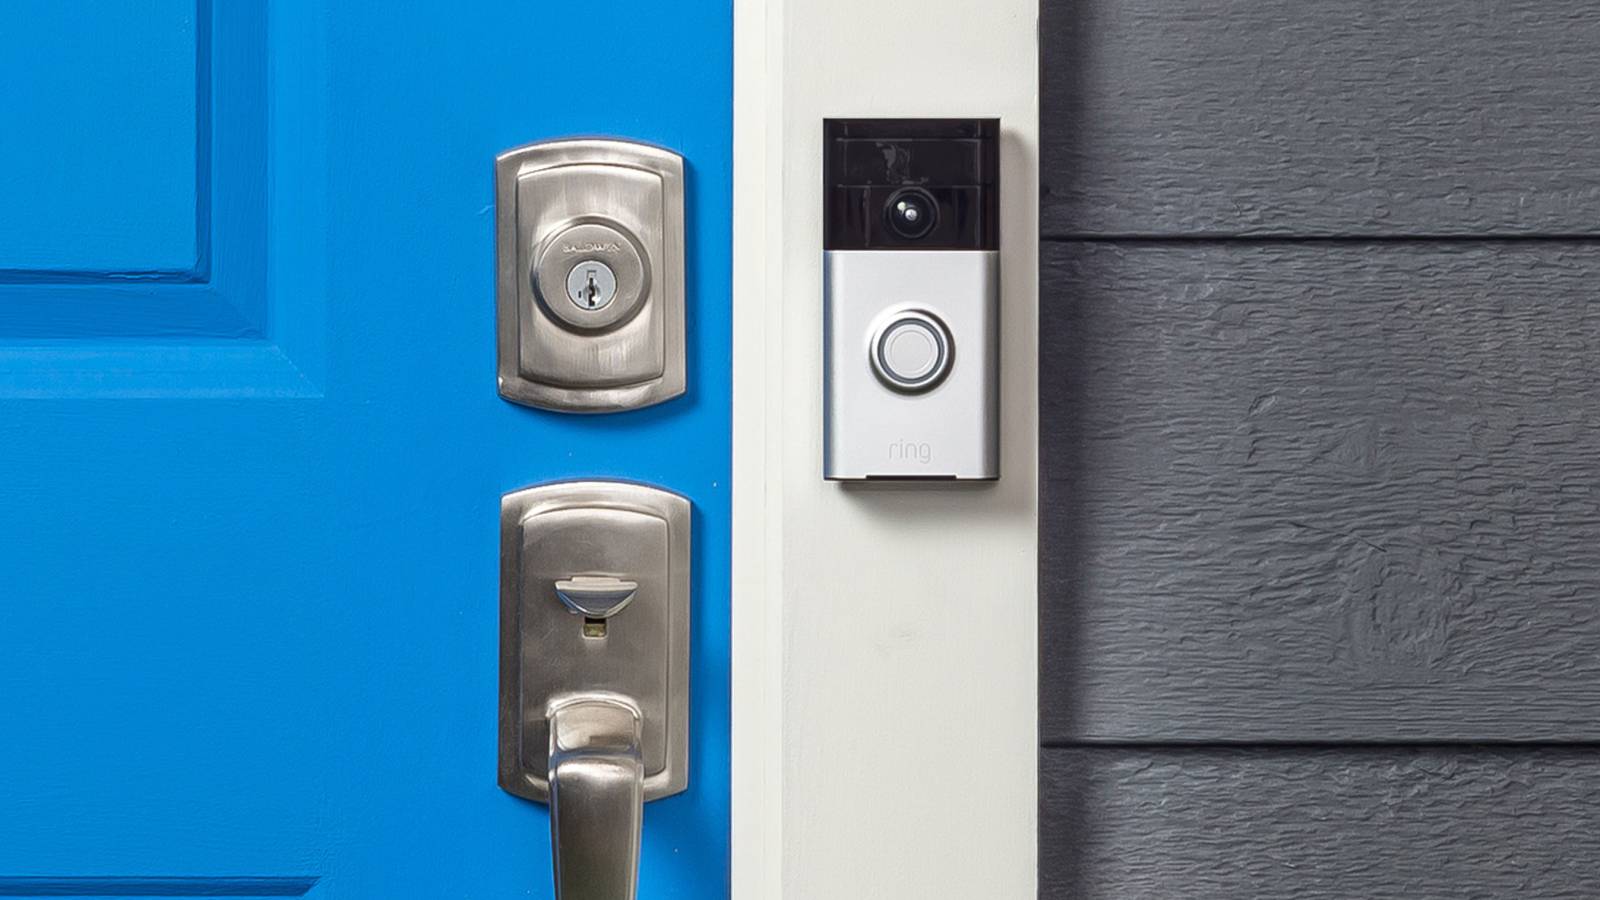 How to Set up Your Ring Doorbell